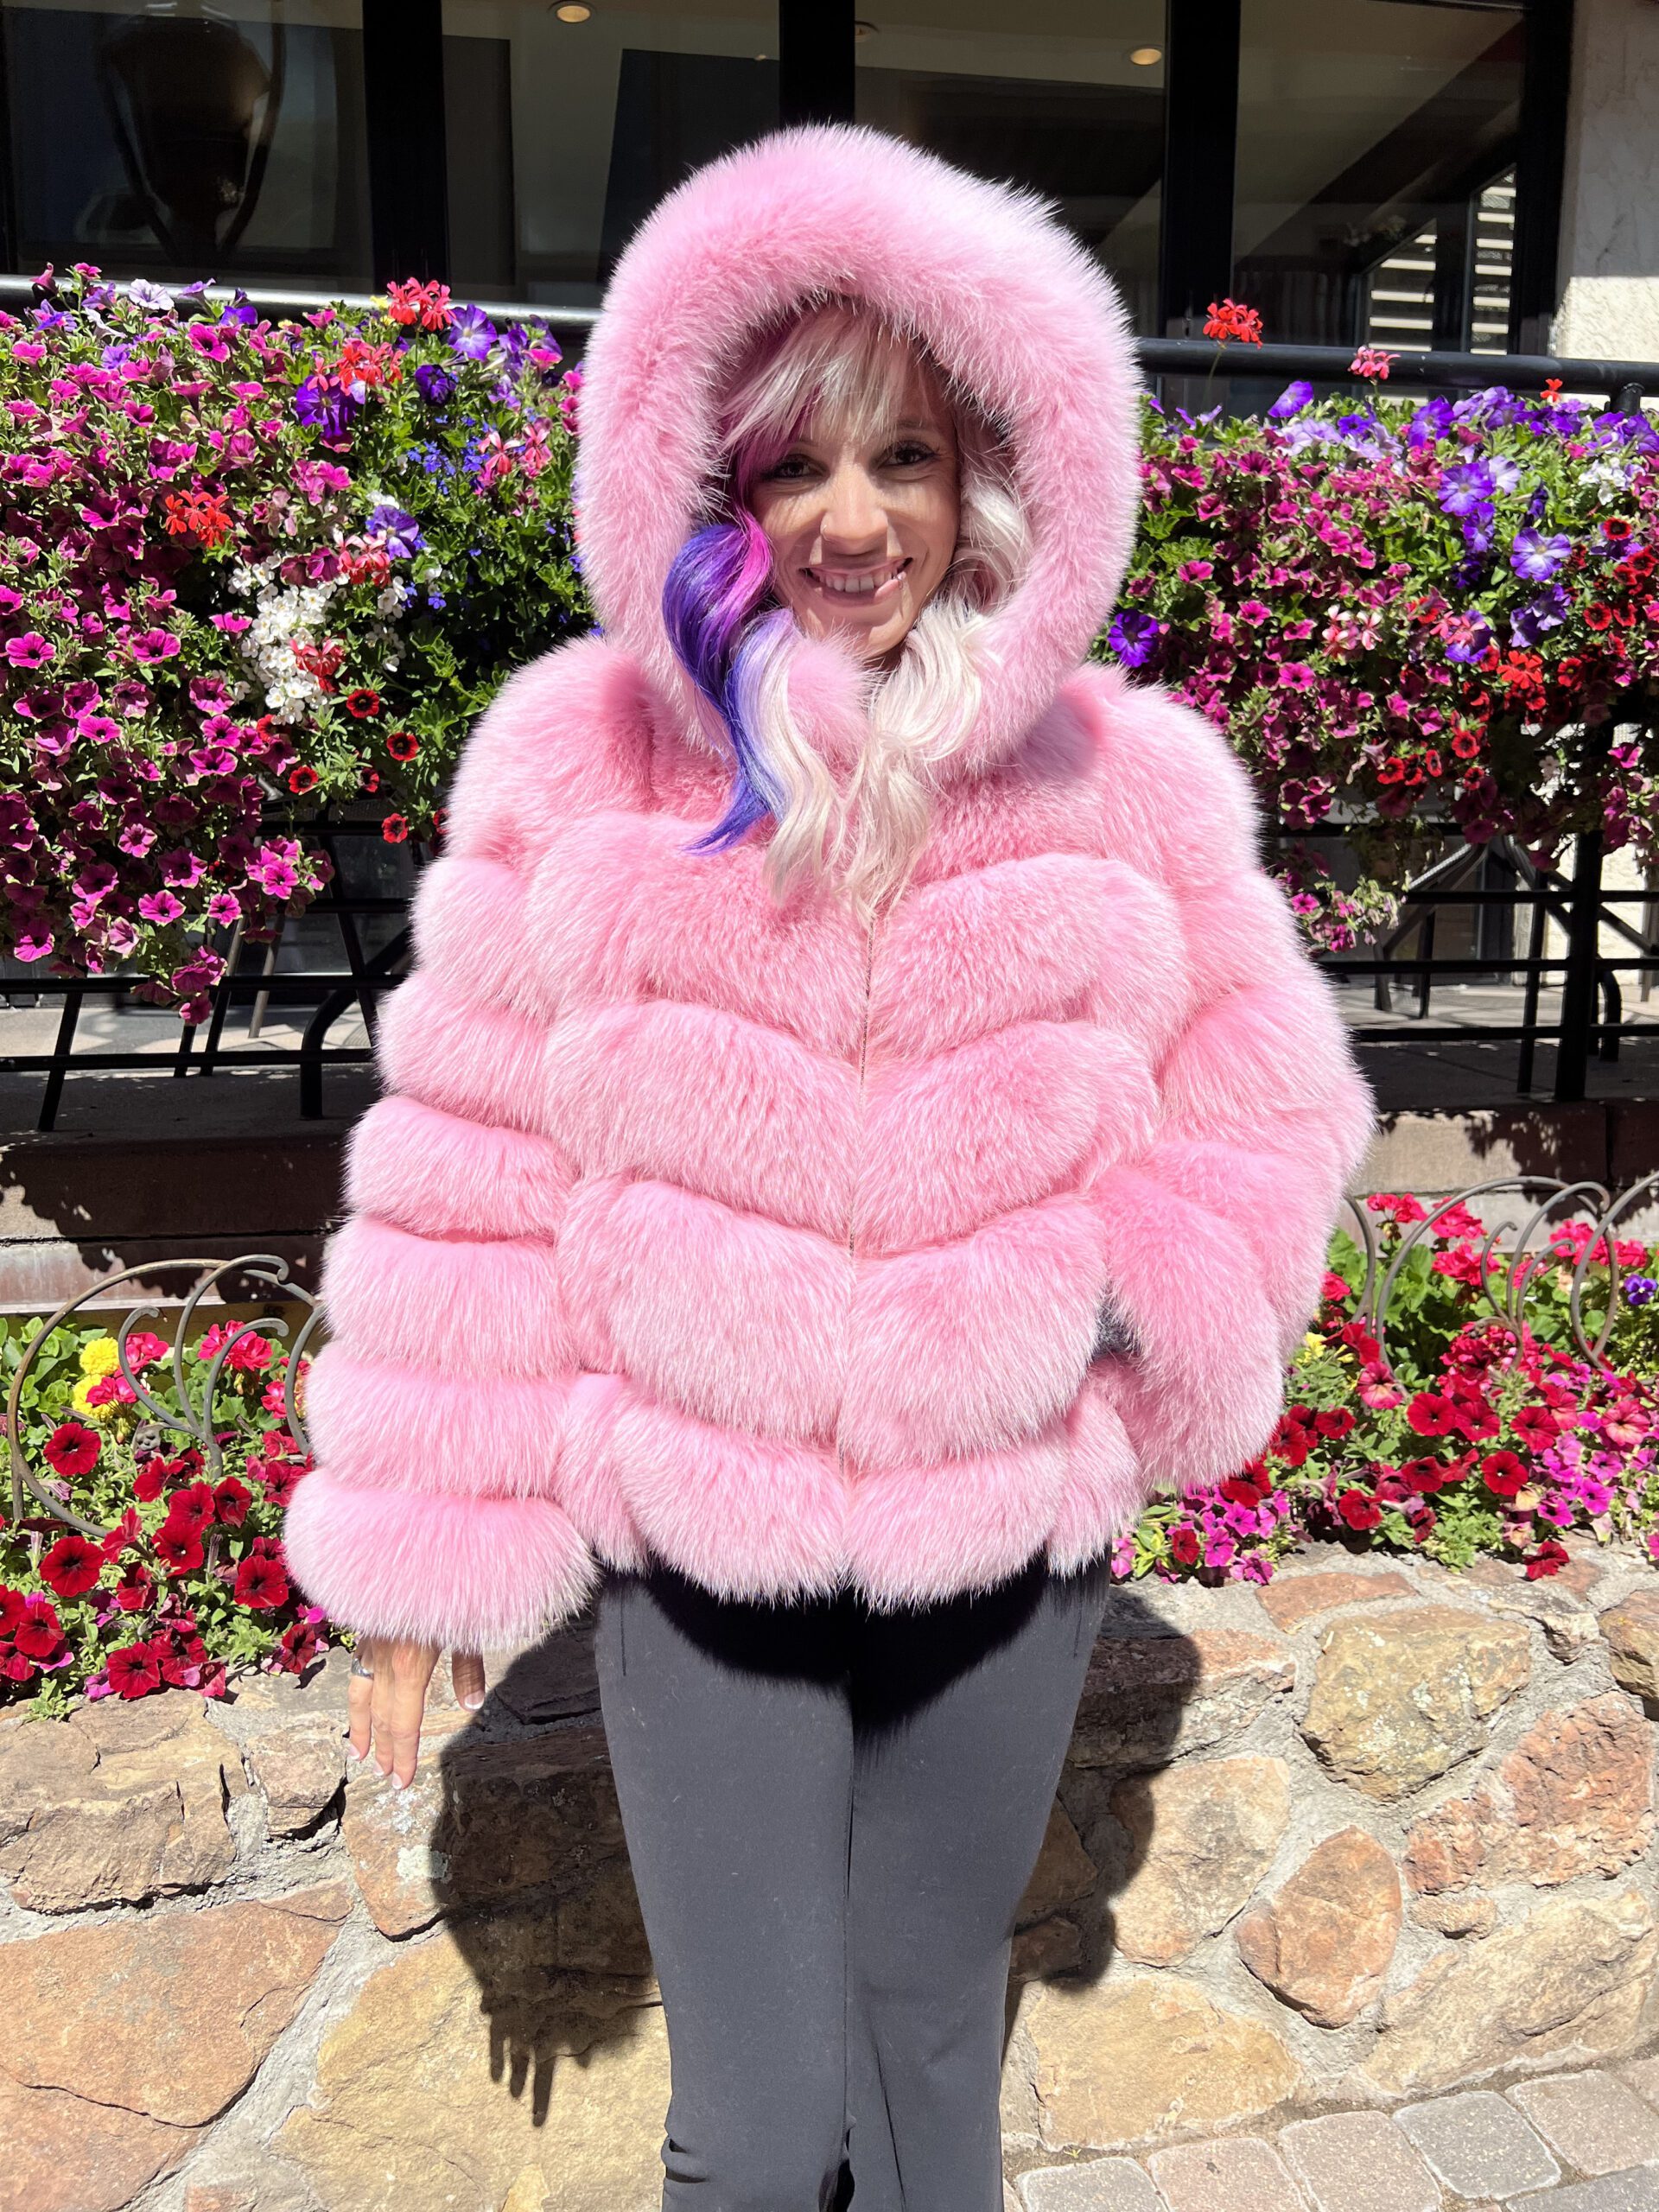 Our dyed pink fox jacket with detachable sleeves and hood is playful yet elegant. It brings a pop of color and versatility to any wardrobe.  This jacket...